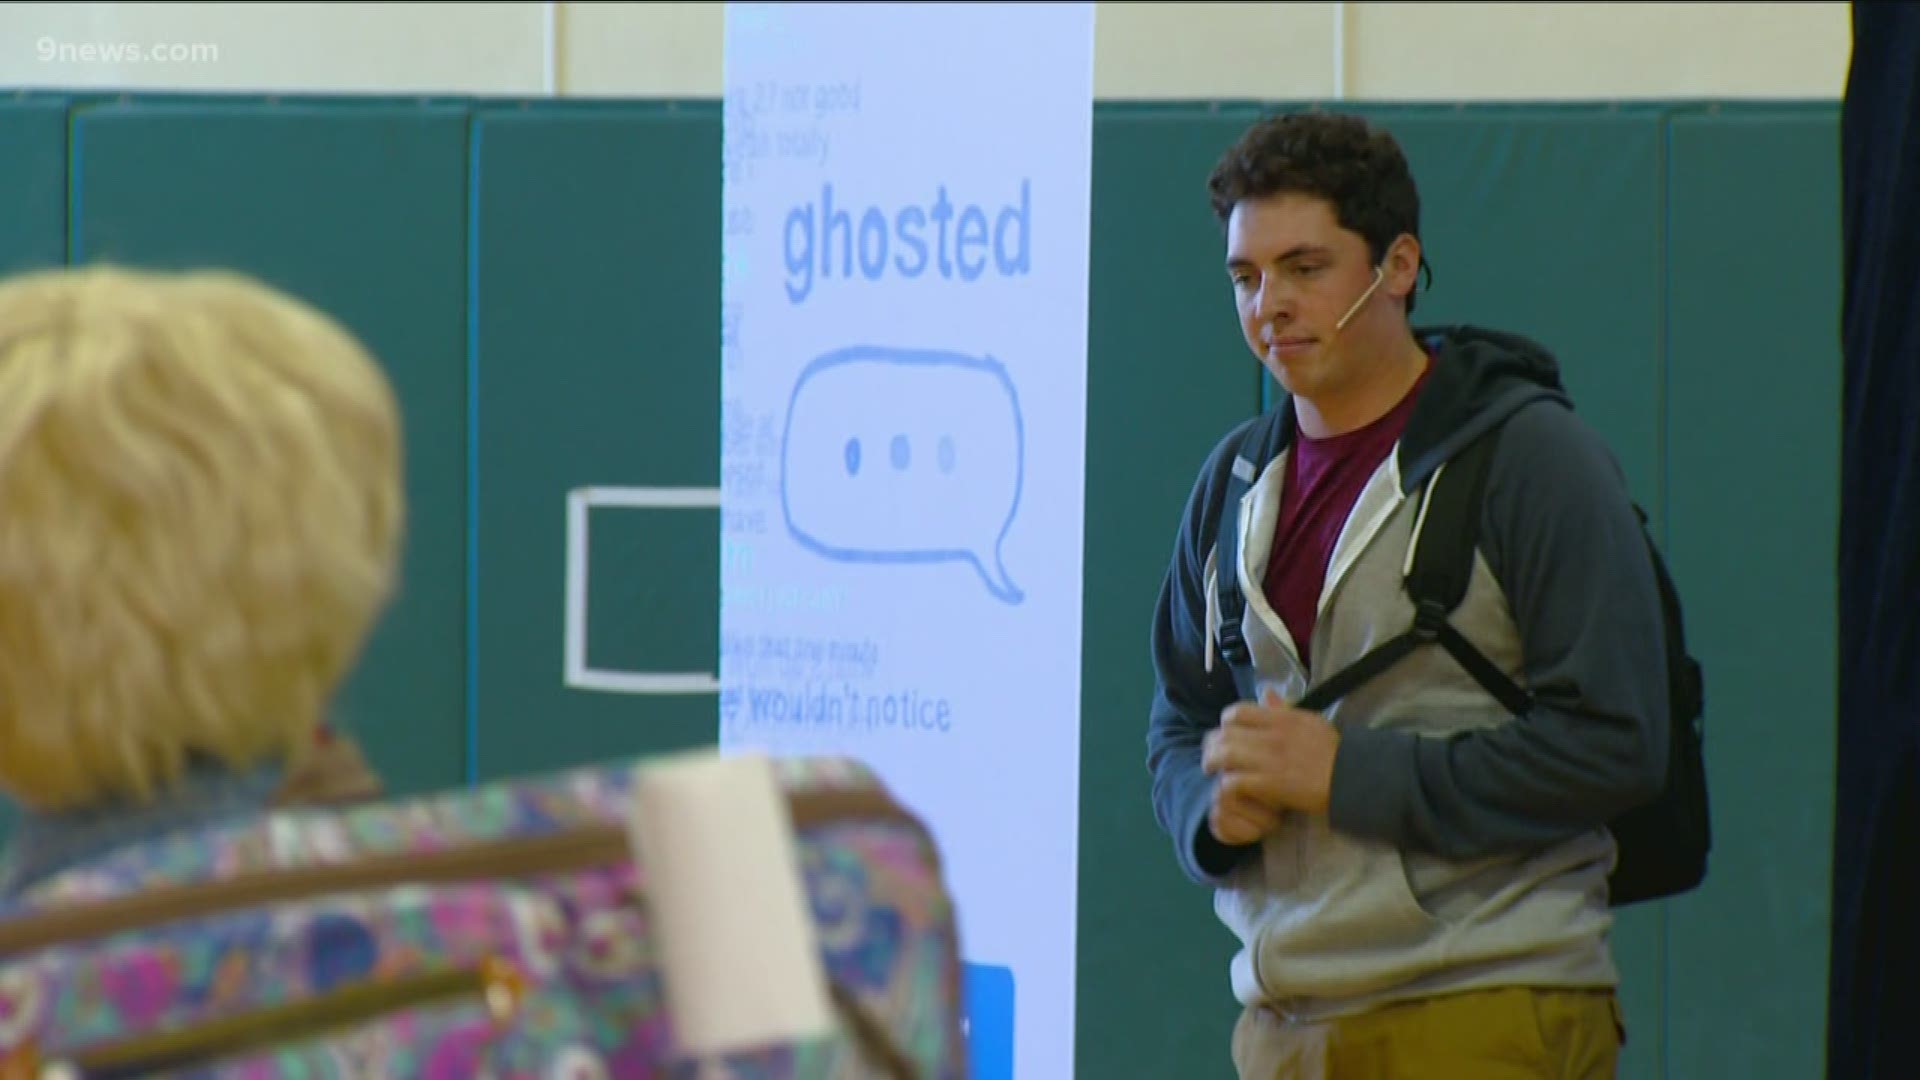 'Ghosted,' put on at the Denver Academy, hit home for a lot of students who watched it.